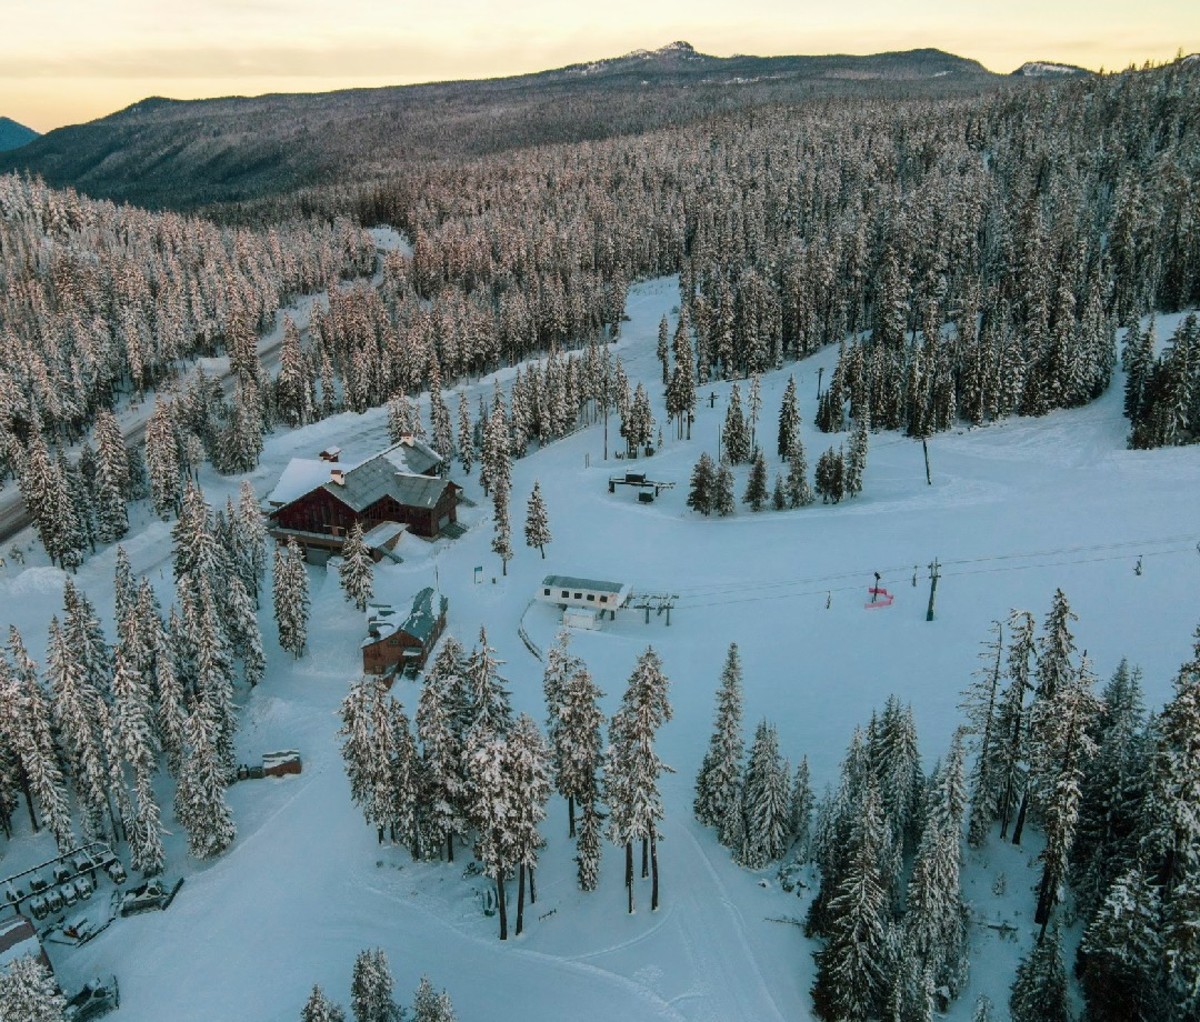 Aerial shot of lower mountain and base lodge at Willamette Pass Resort